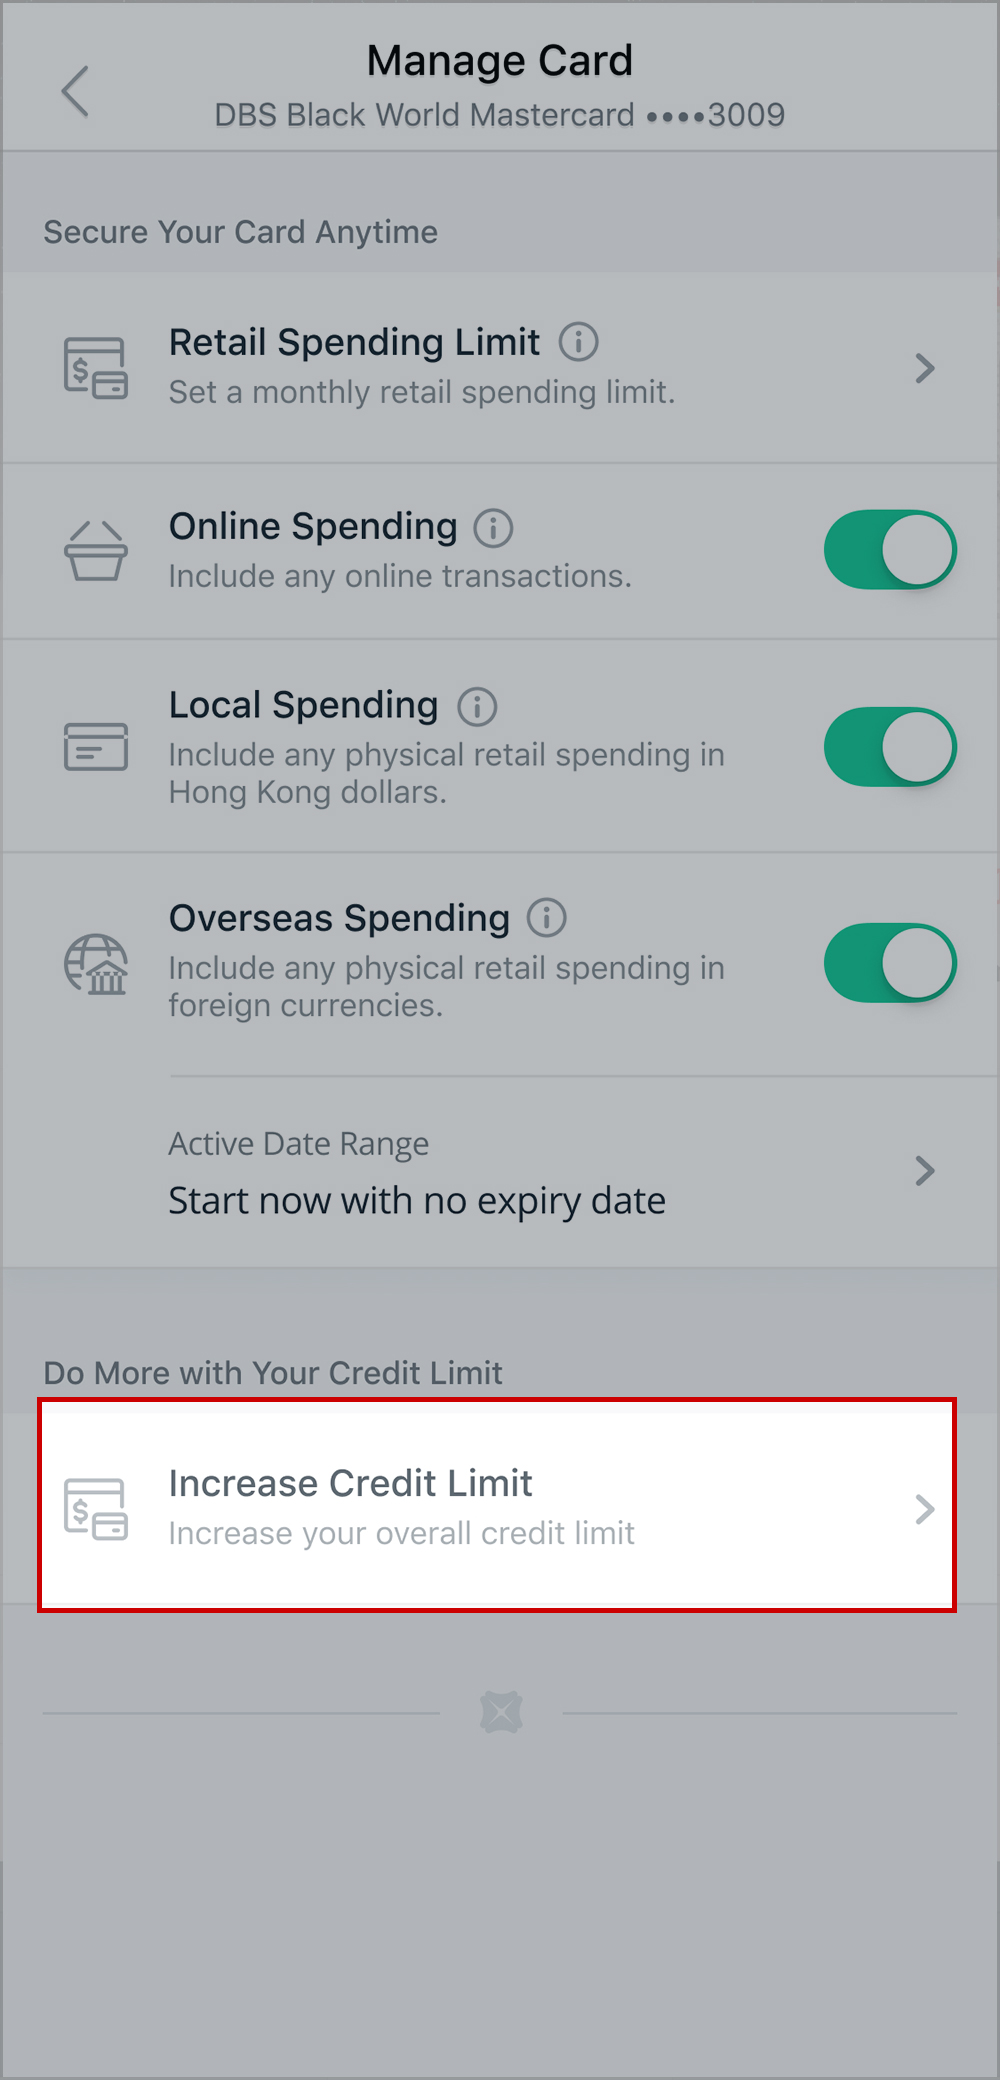 You can increase your credit limit instantly